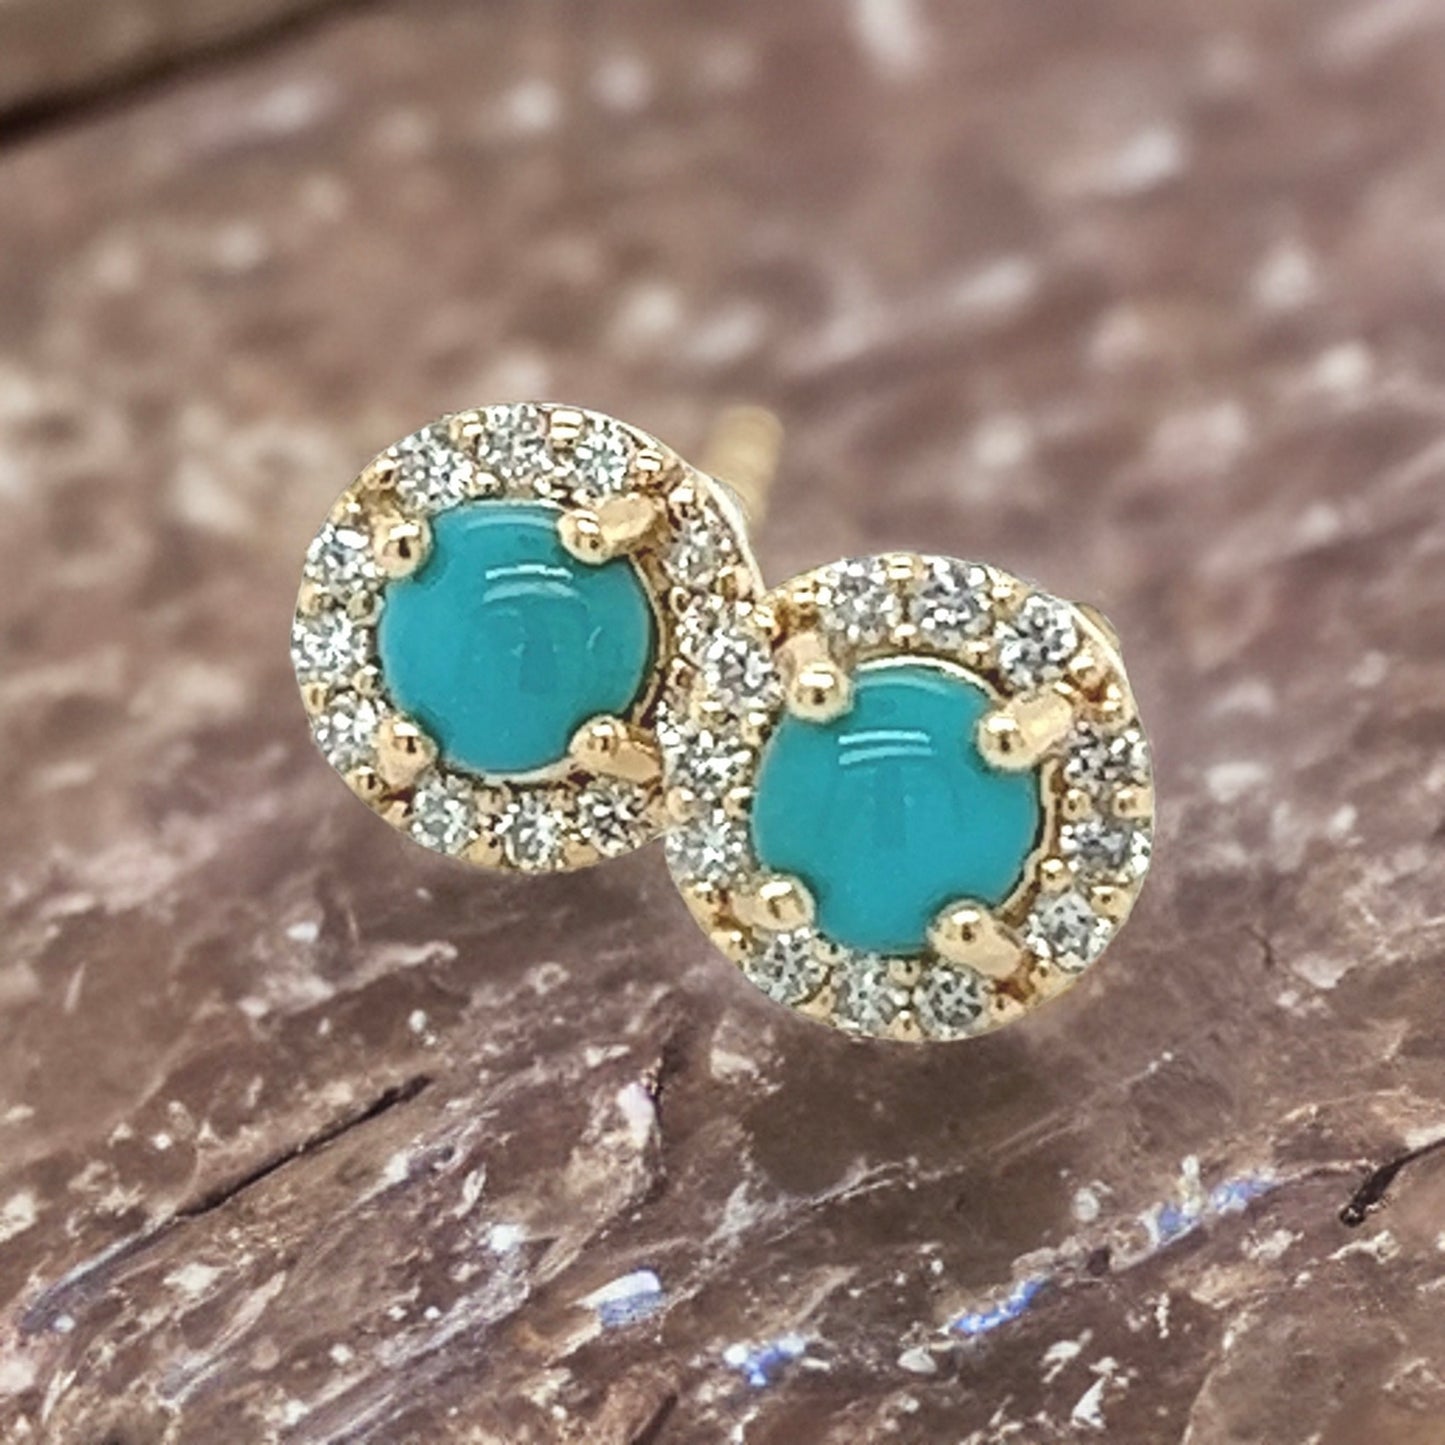 Natural Turquoise Diamond Stud Earrings 14k Yellow Gold 0.65 TCW Certified $1,590 217840